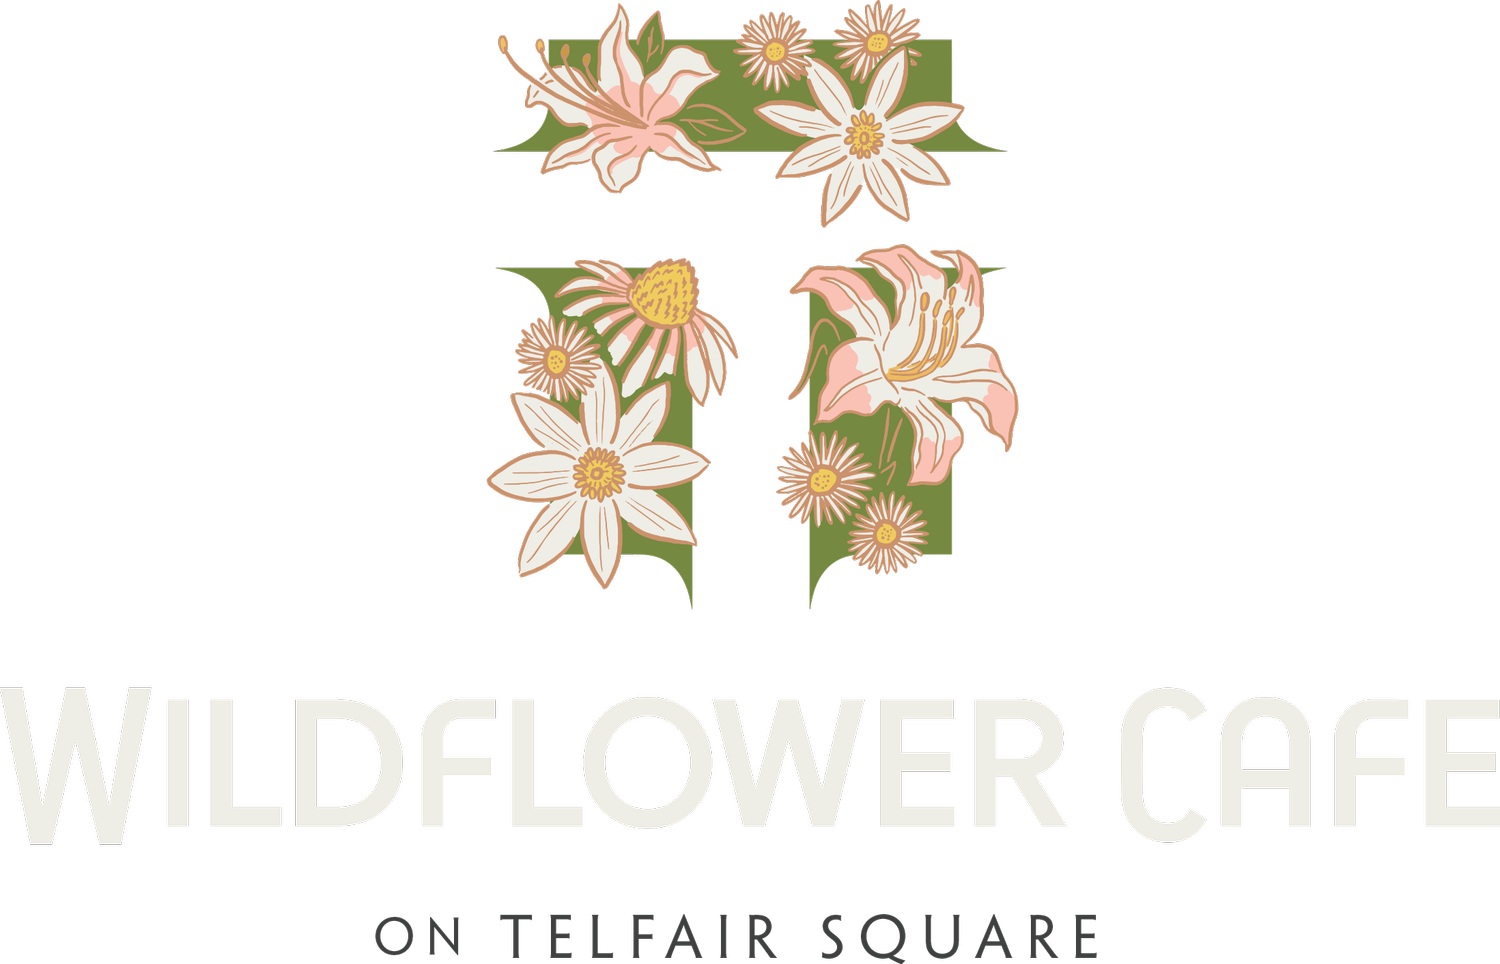 WILDFLOWER CAFE AT TELFAIR SQUARE